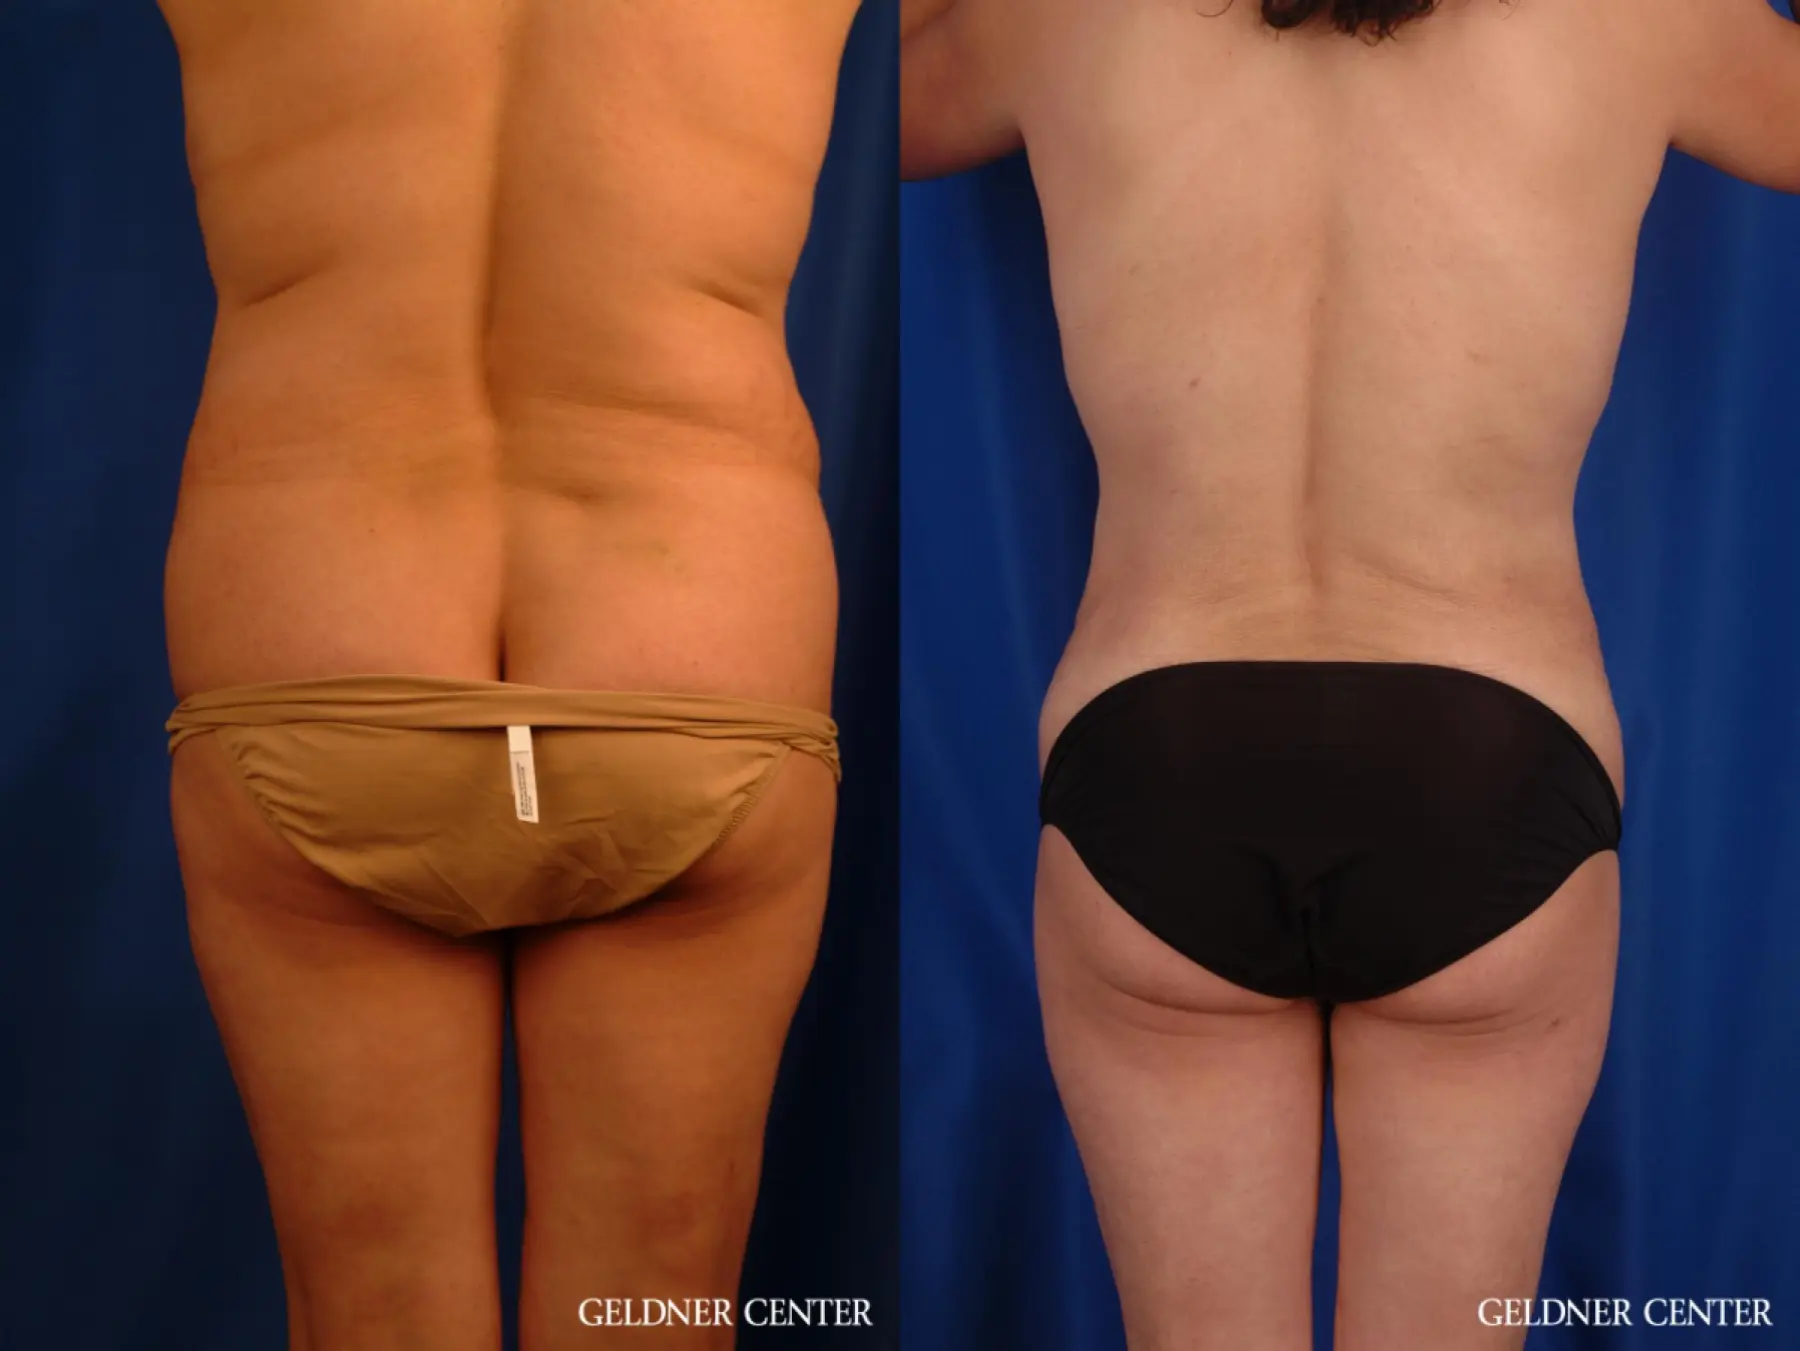 Vaser lipo patient 2629 before and after photos - Before and After 4